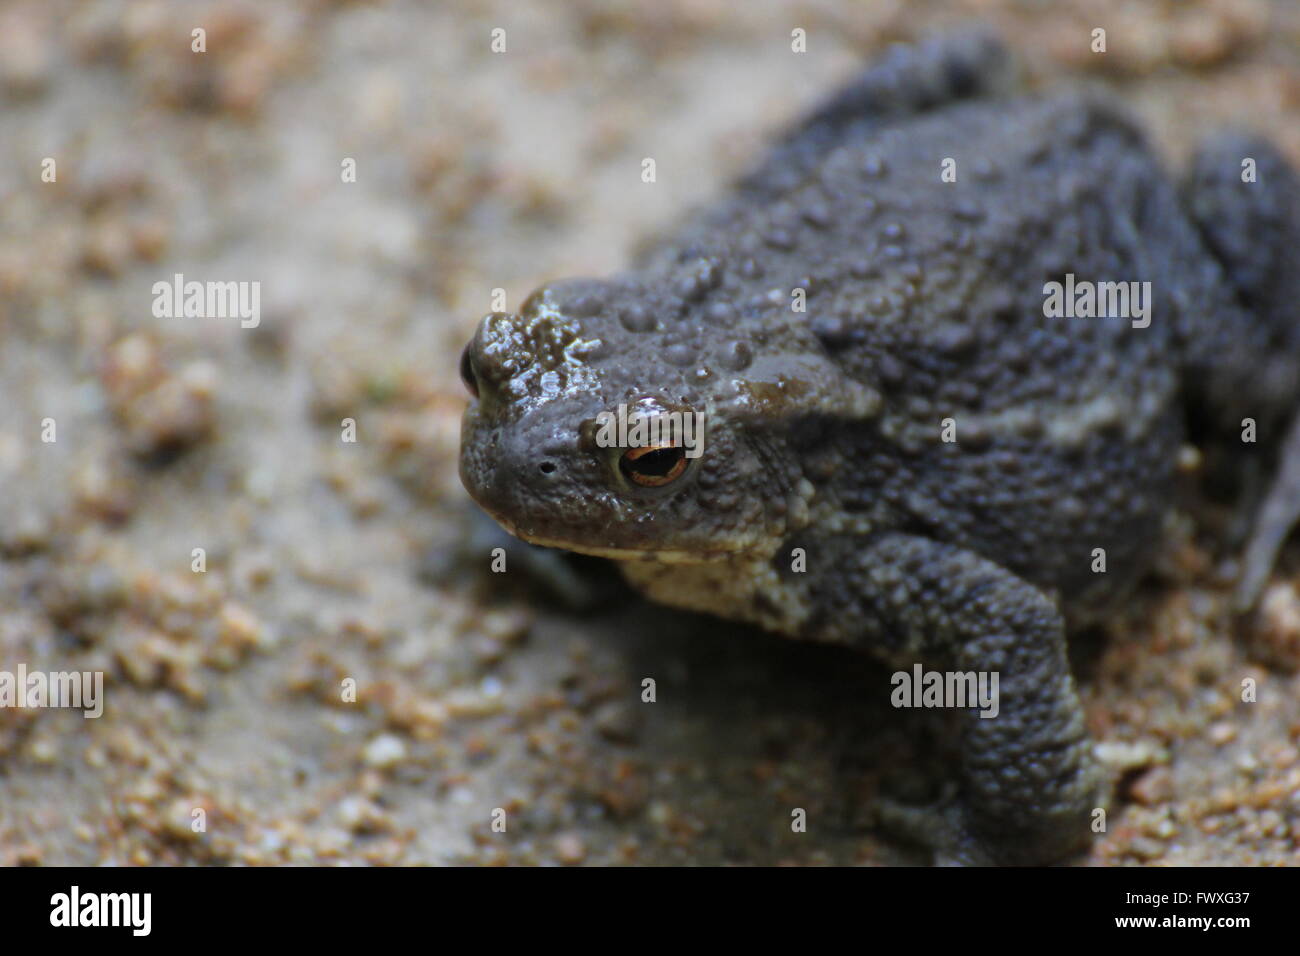 A common toad on sandy ground. Stock Photo